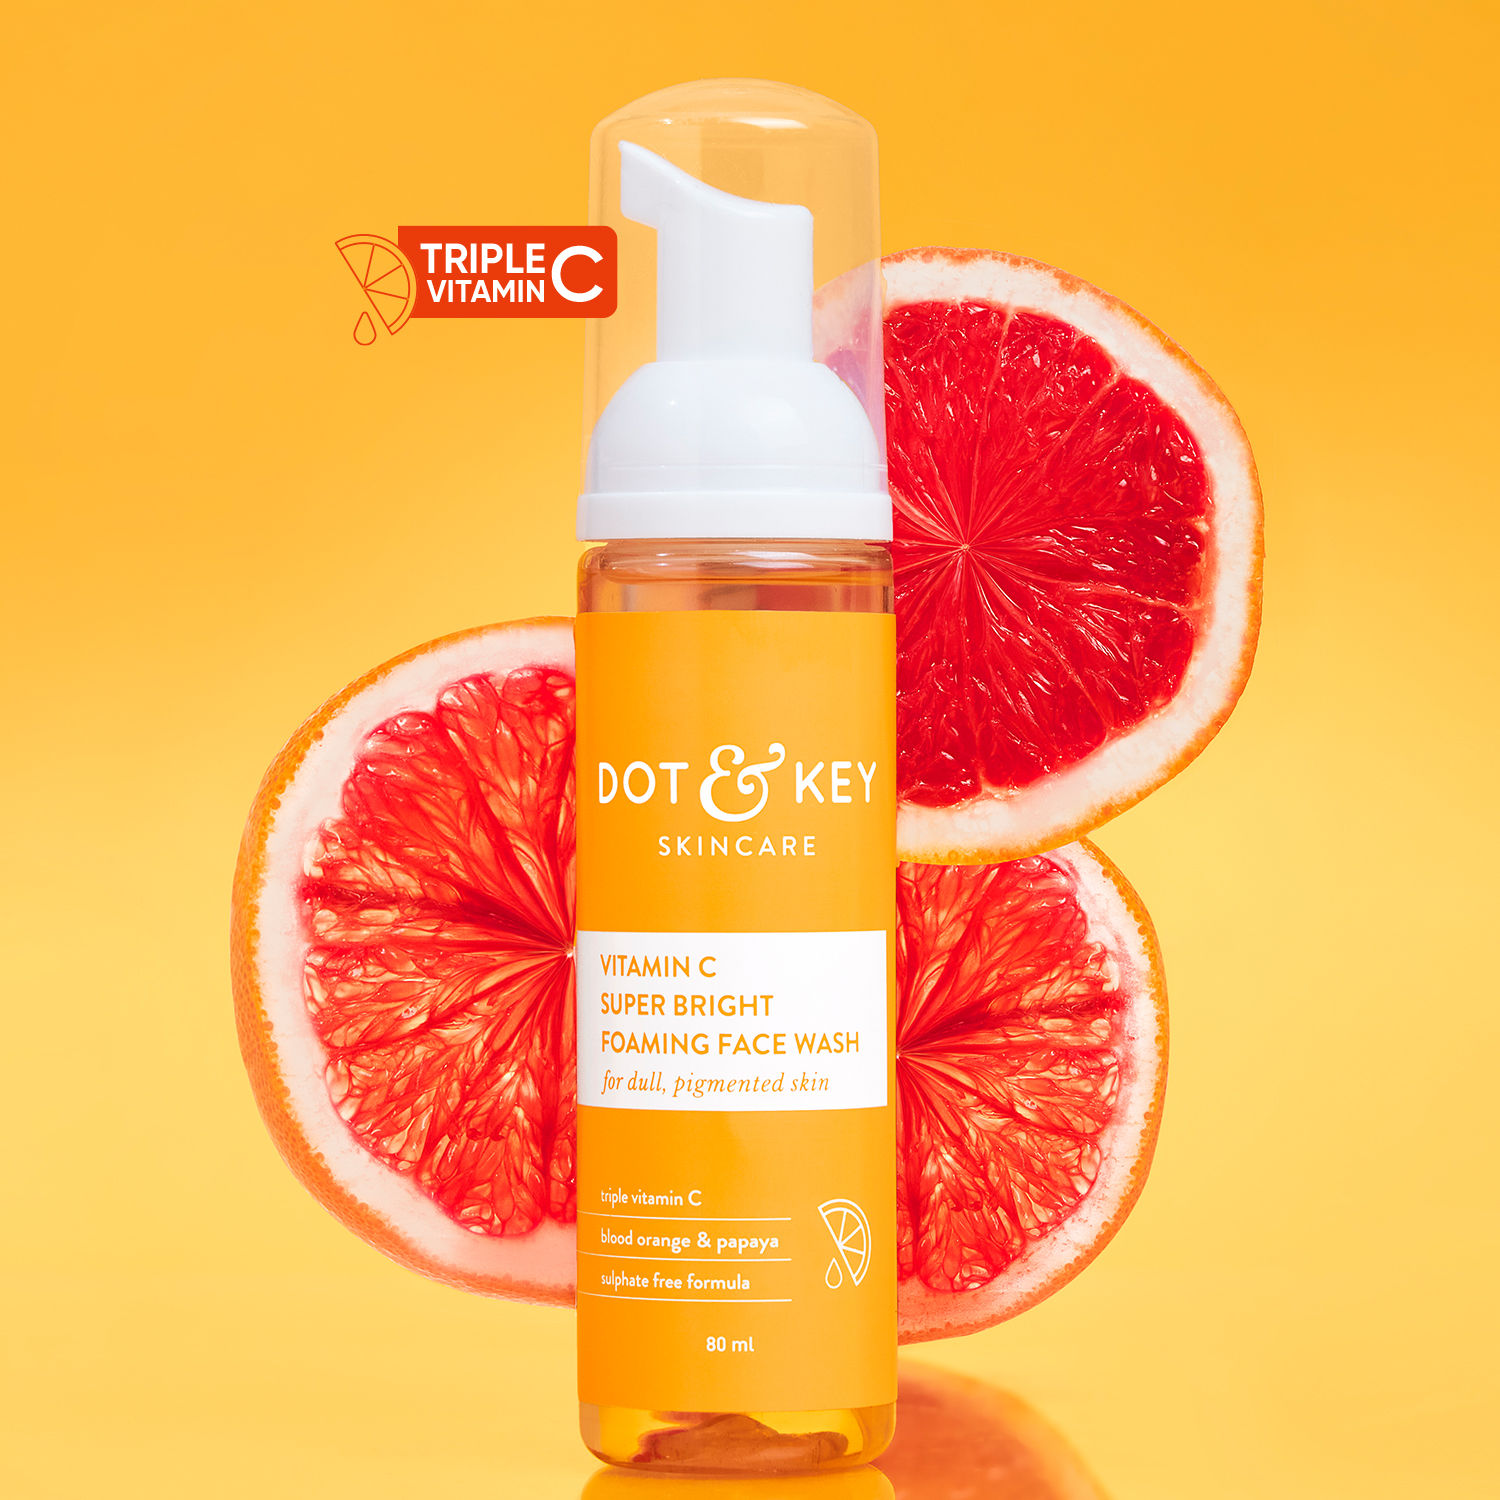 Buy Dot & Key Vitamin C Super Bright Foaming Face Wash For Dull & Pigmented Skin| With Triple Vitamin C, Blood Orange & Papaya | Silphate Free | 80ml - Purplle